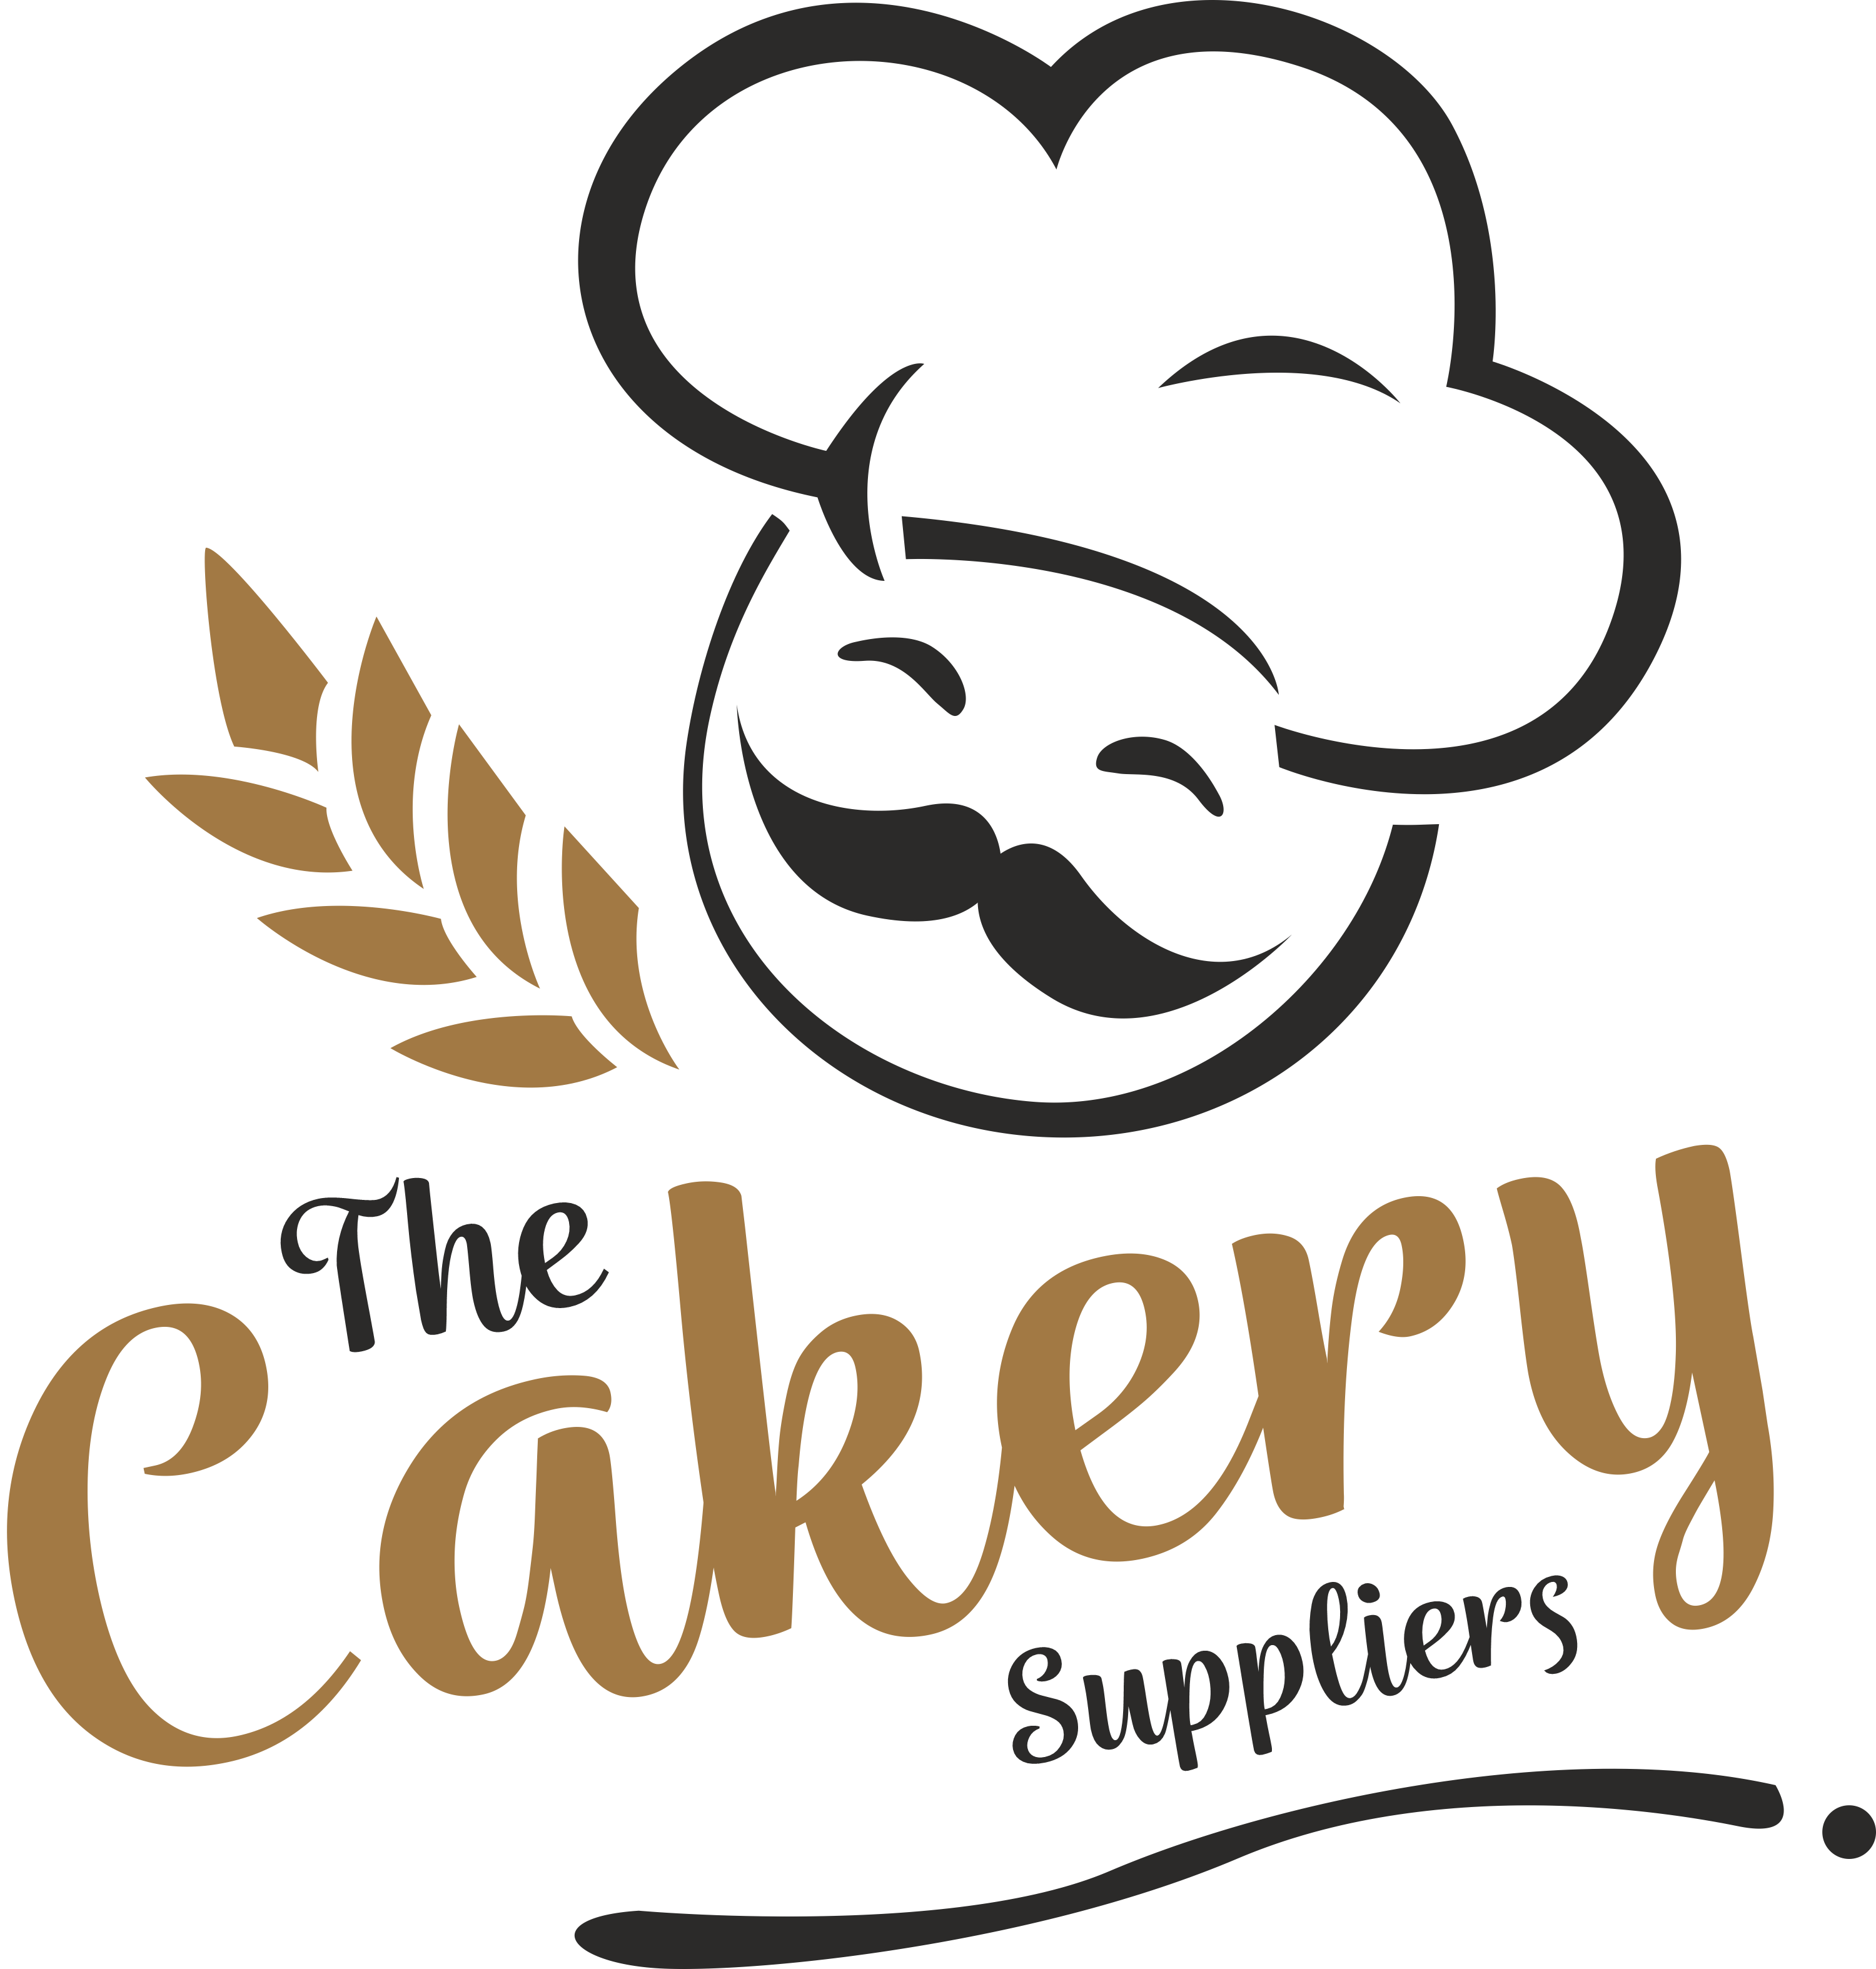 Cakery Suppliers – cakerysuppliers